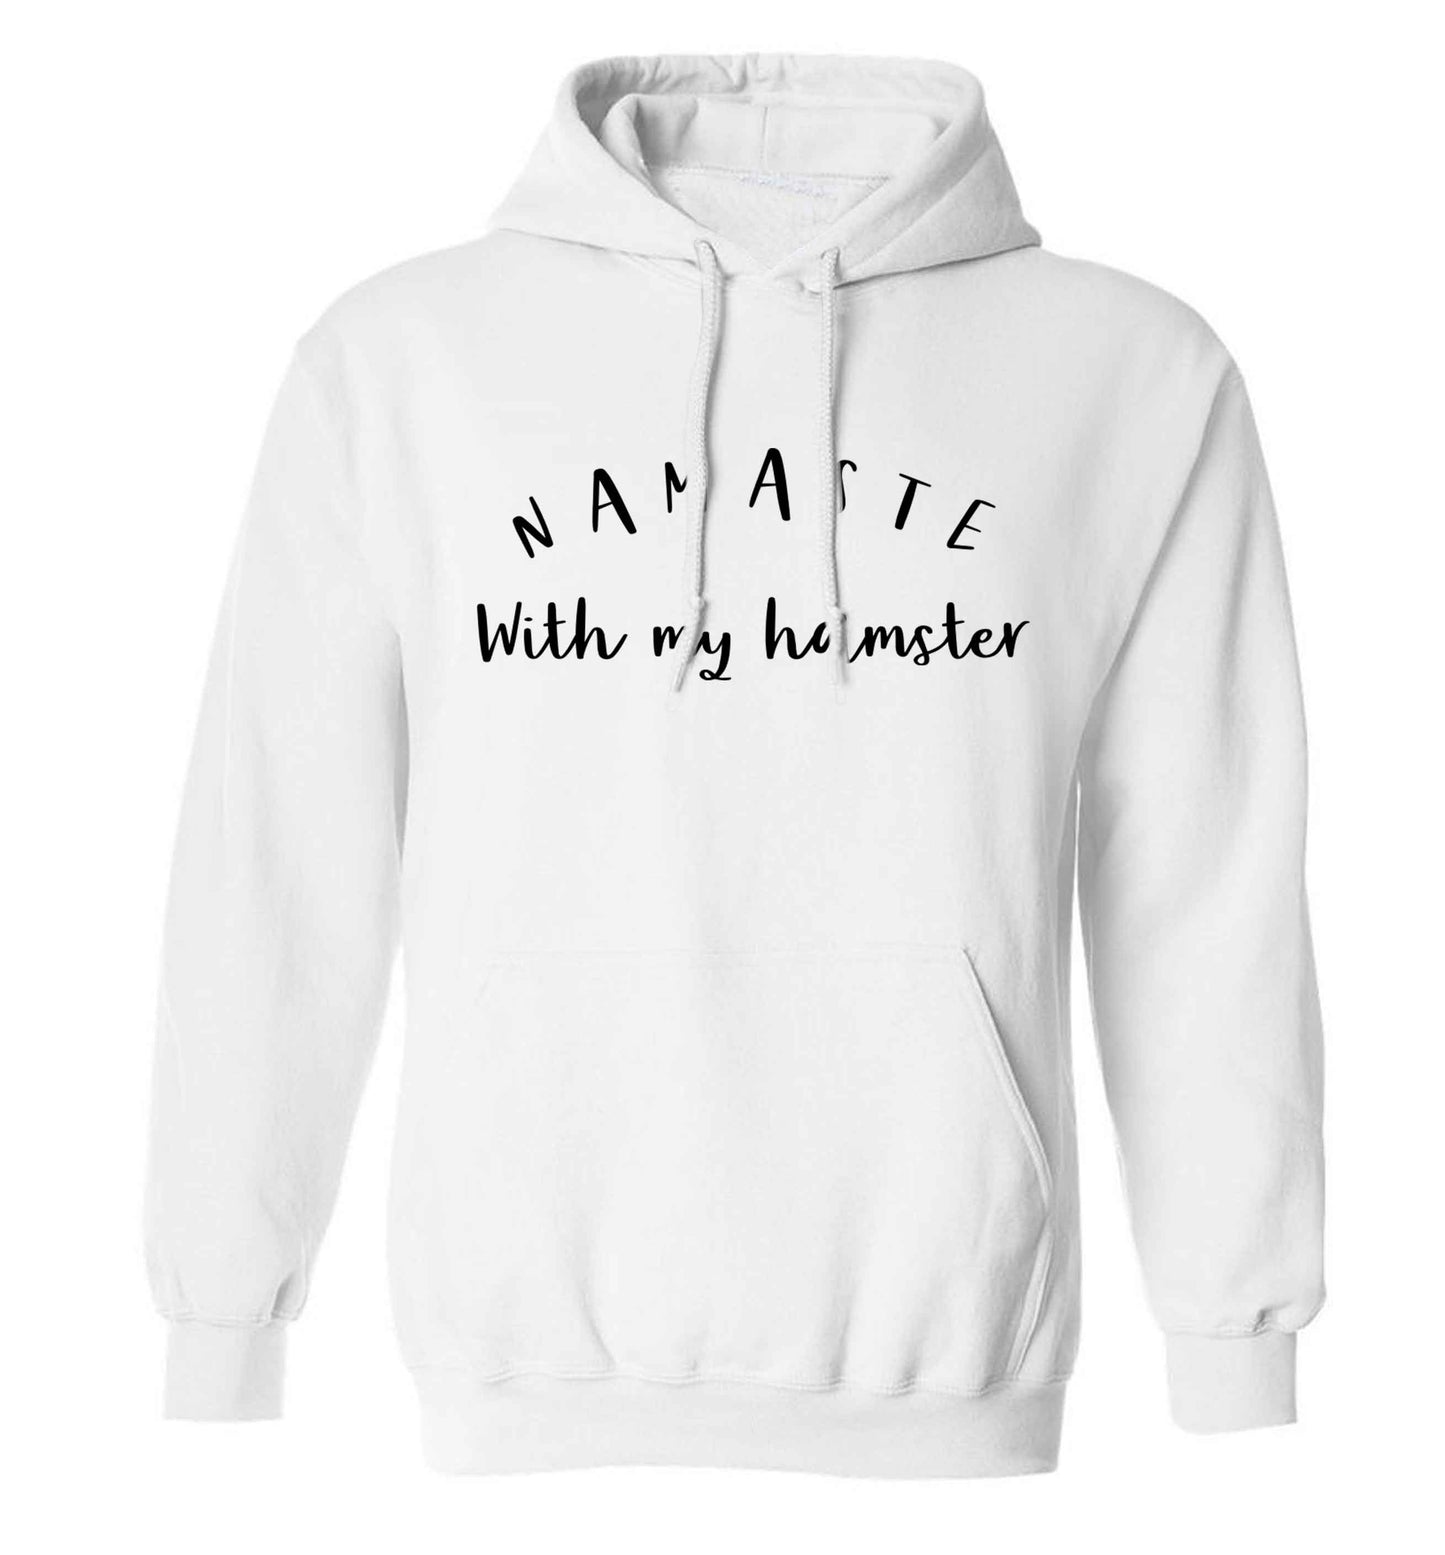 Namaste with my hamster adults unisex white hoodie 2XL